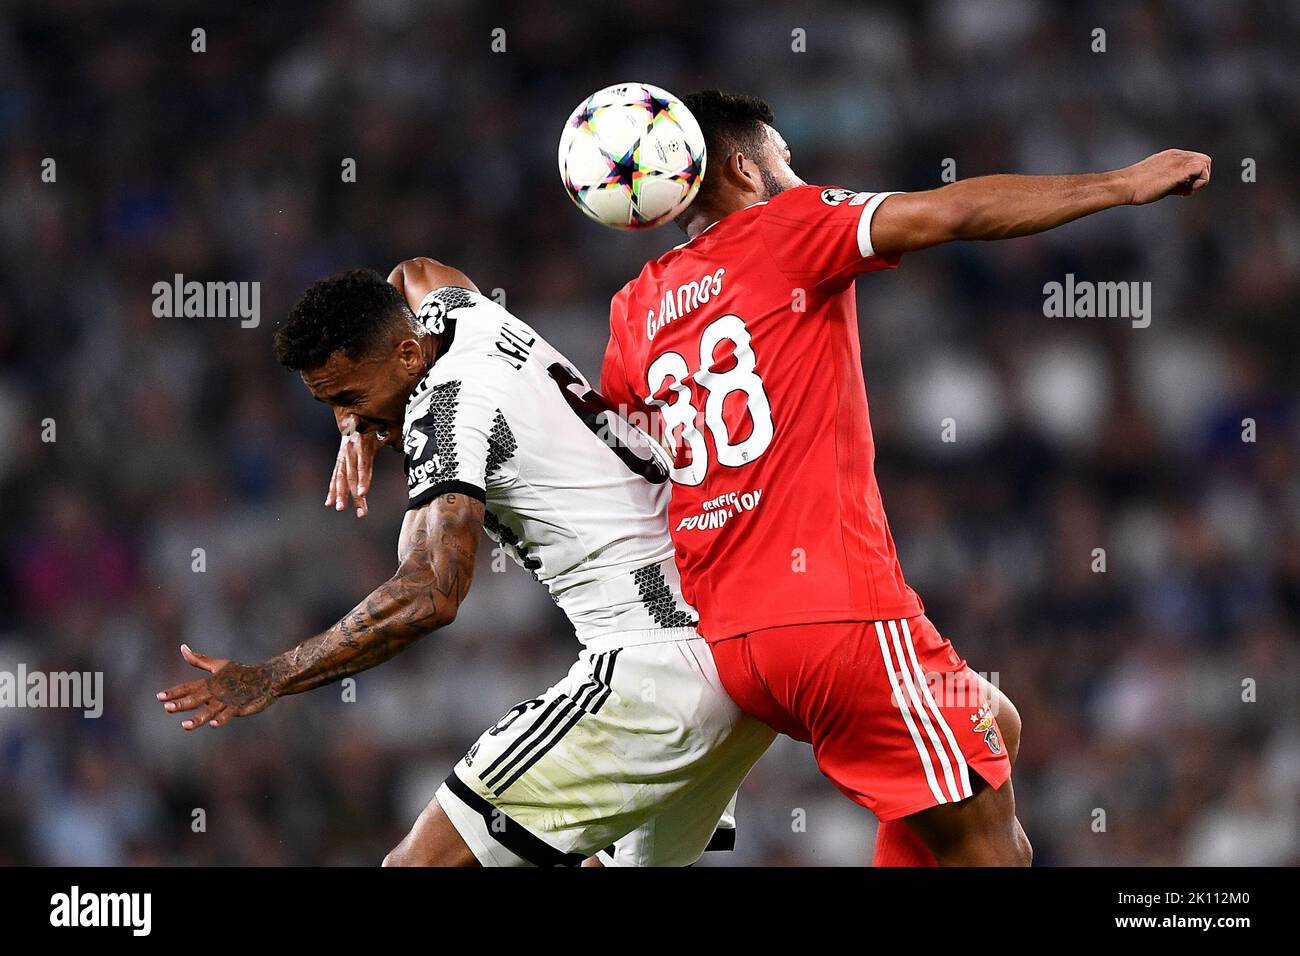 Turin, Italy. 14 September 2022. Goncalo Ramos of SL Benfica competes for a header with Danilo Luiz da Silva of Juventus FC during the UEFA Champions League football match between Juventus FC and SL Benfica. Credit: Nicolò Campo/Alamy Live News Stock Photo